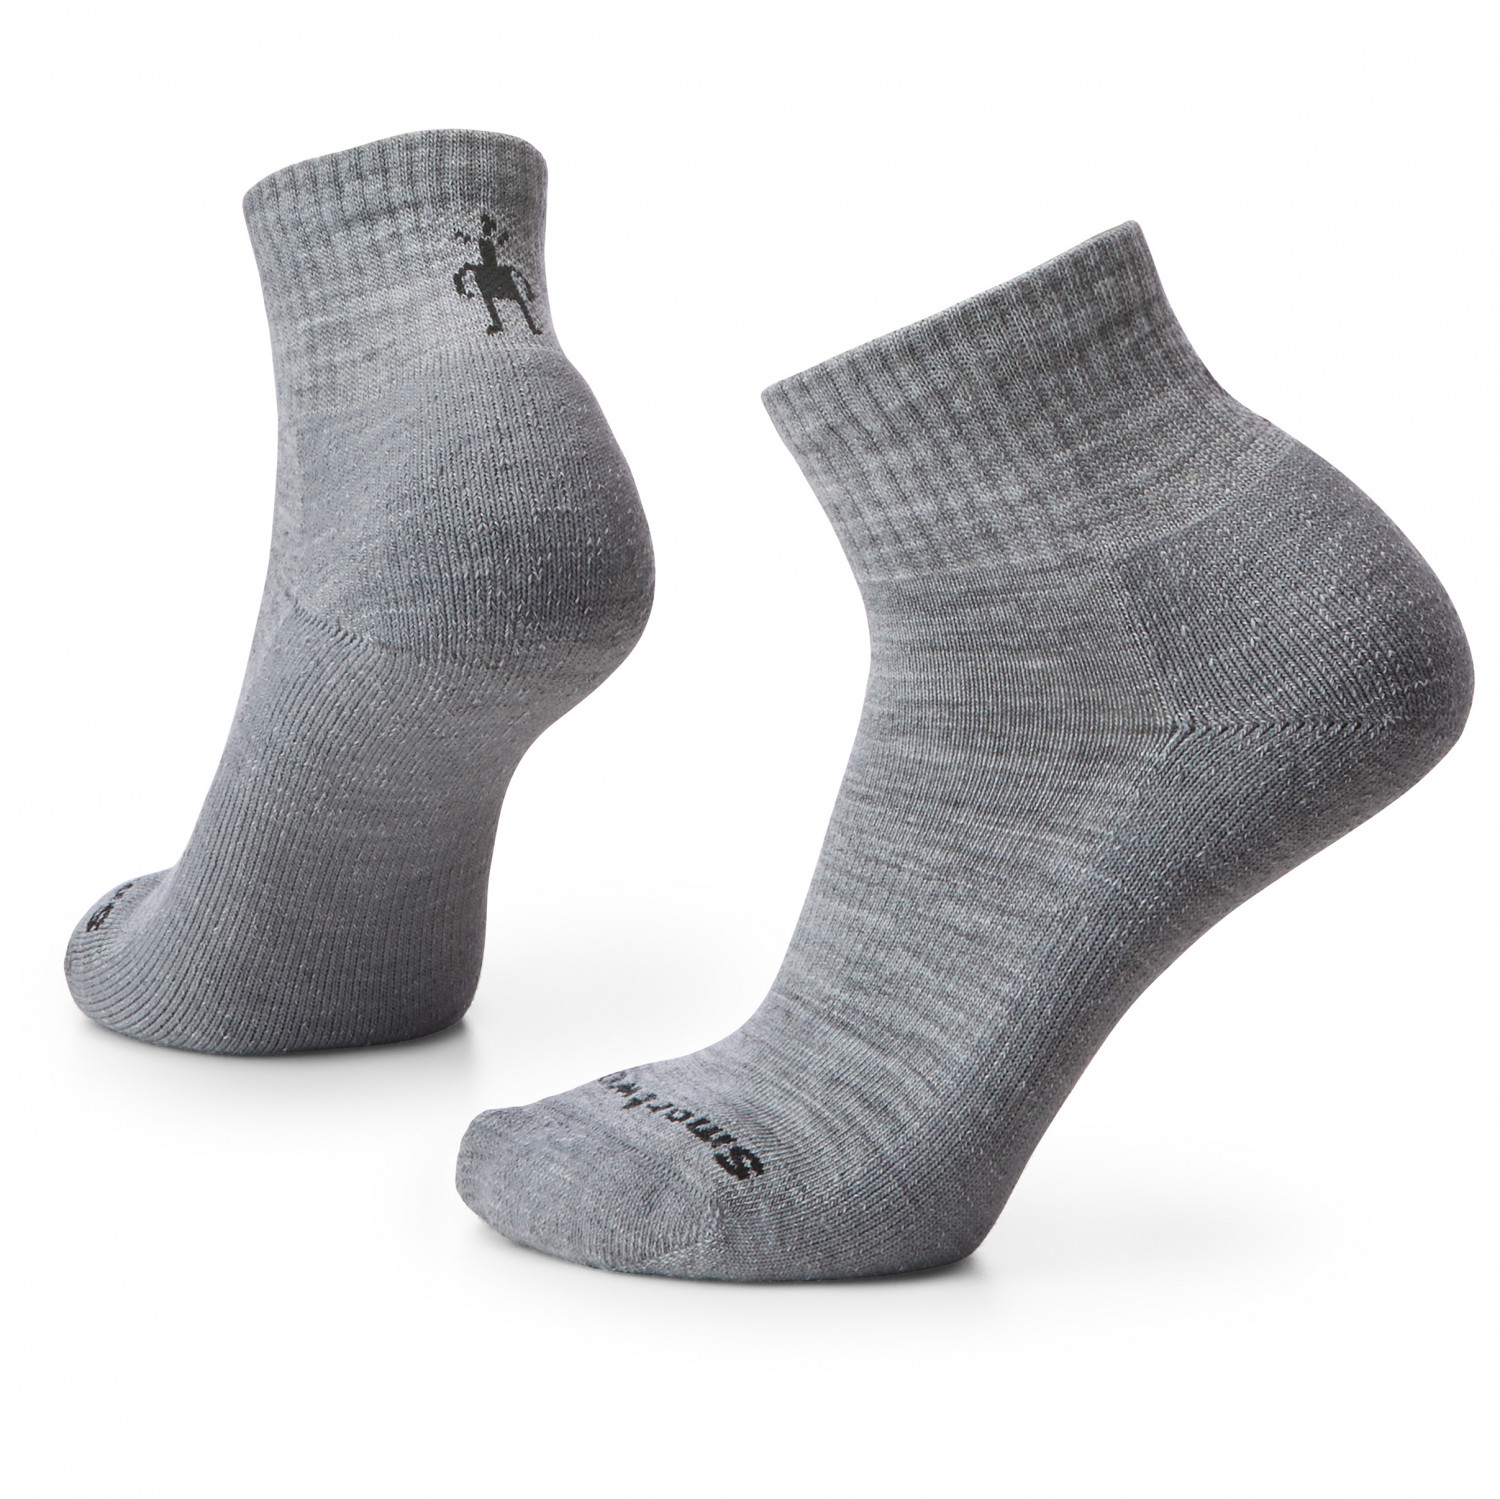 Многофункциональные носки Smartwool Everyday Solid Rib Ankle Socks, цвет Light Gray ankle support sports ankle socks running riding dance ankle sprain protection ankle strap protector ankle guard